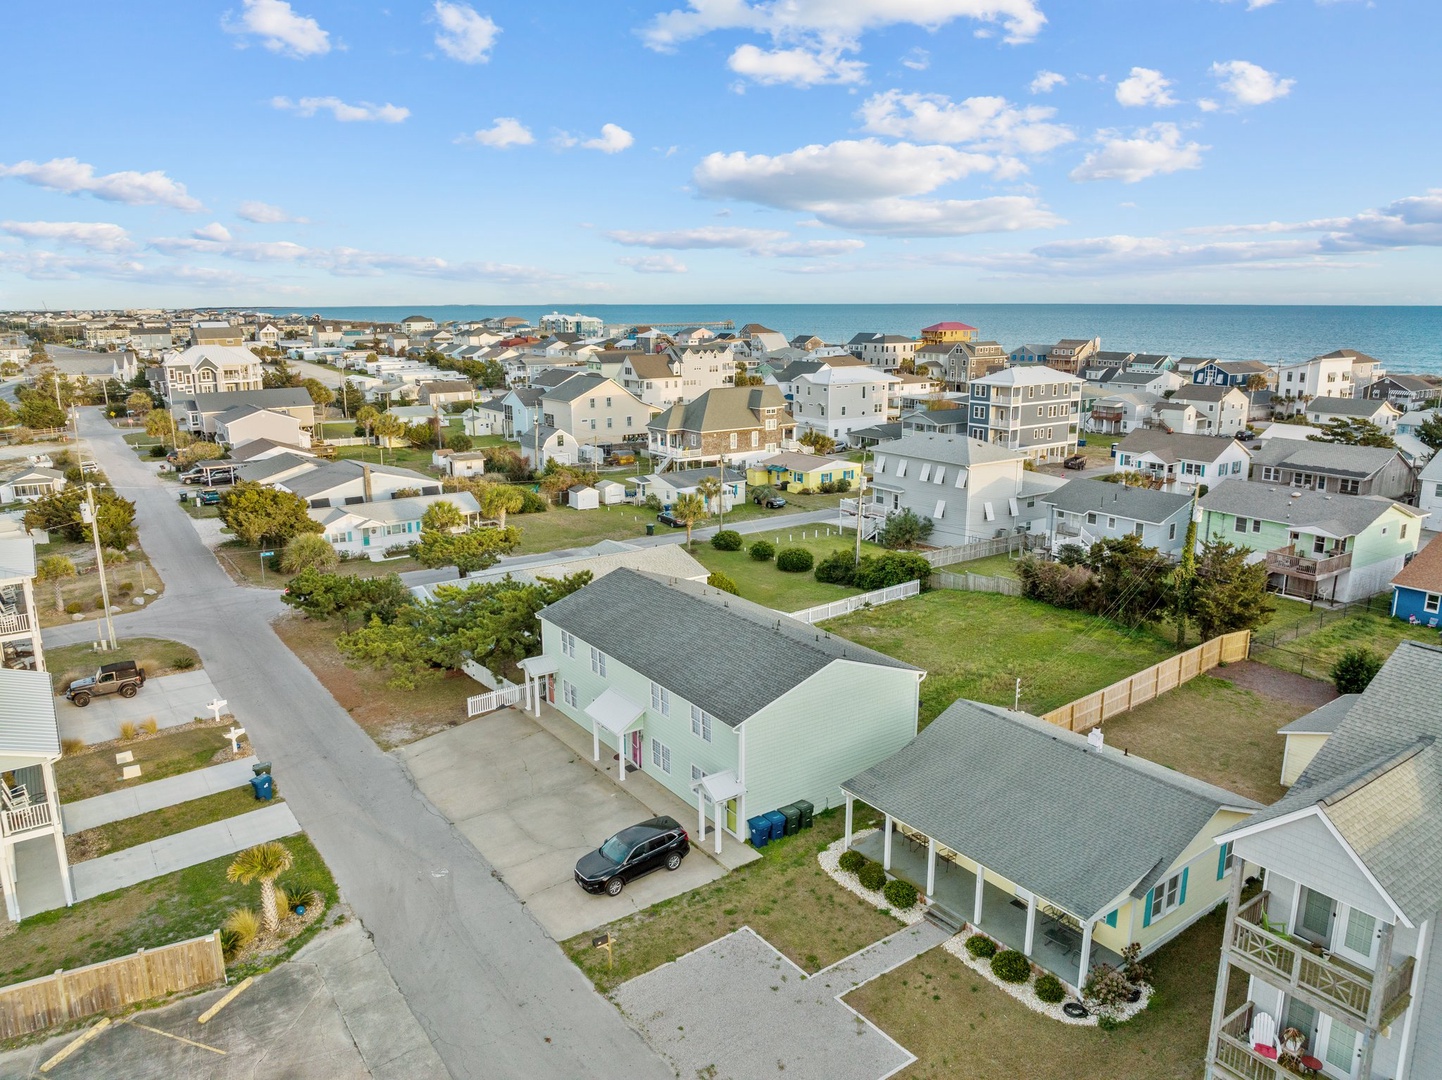 Aerial View & Showcase of the Crystal Coast